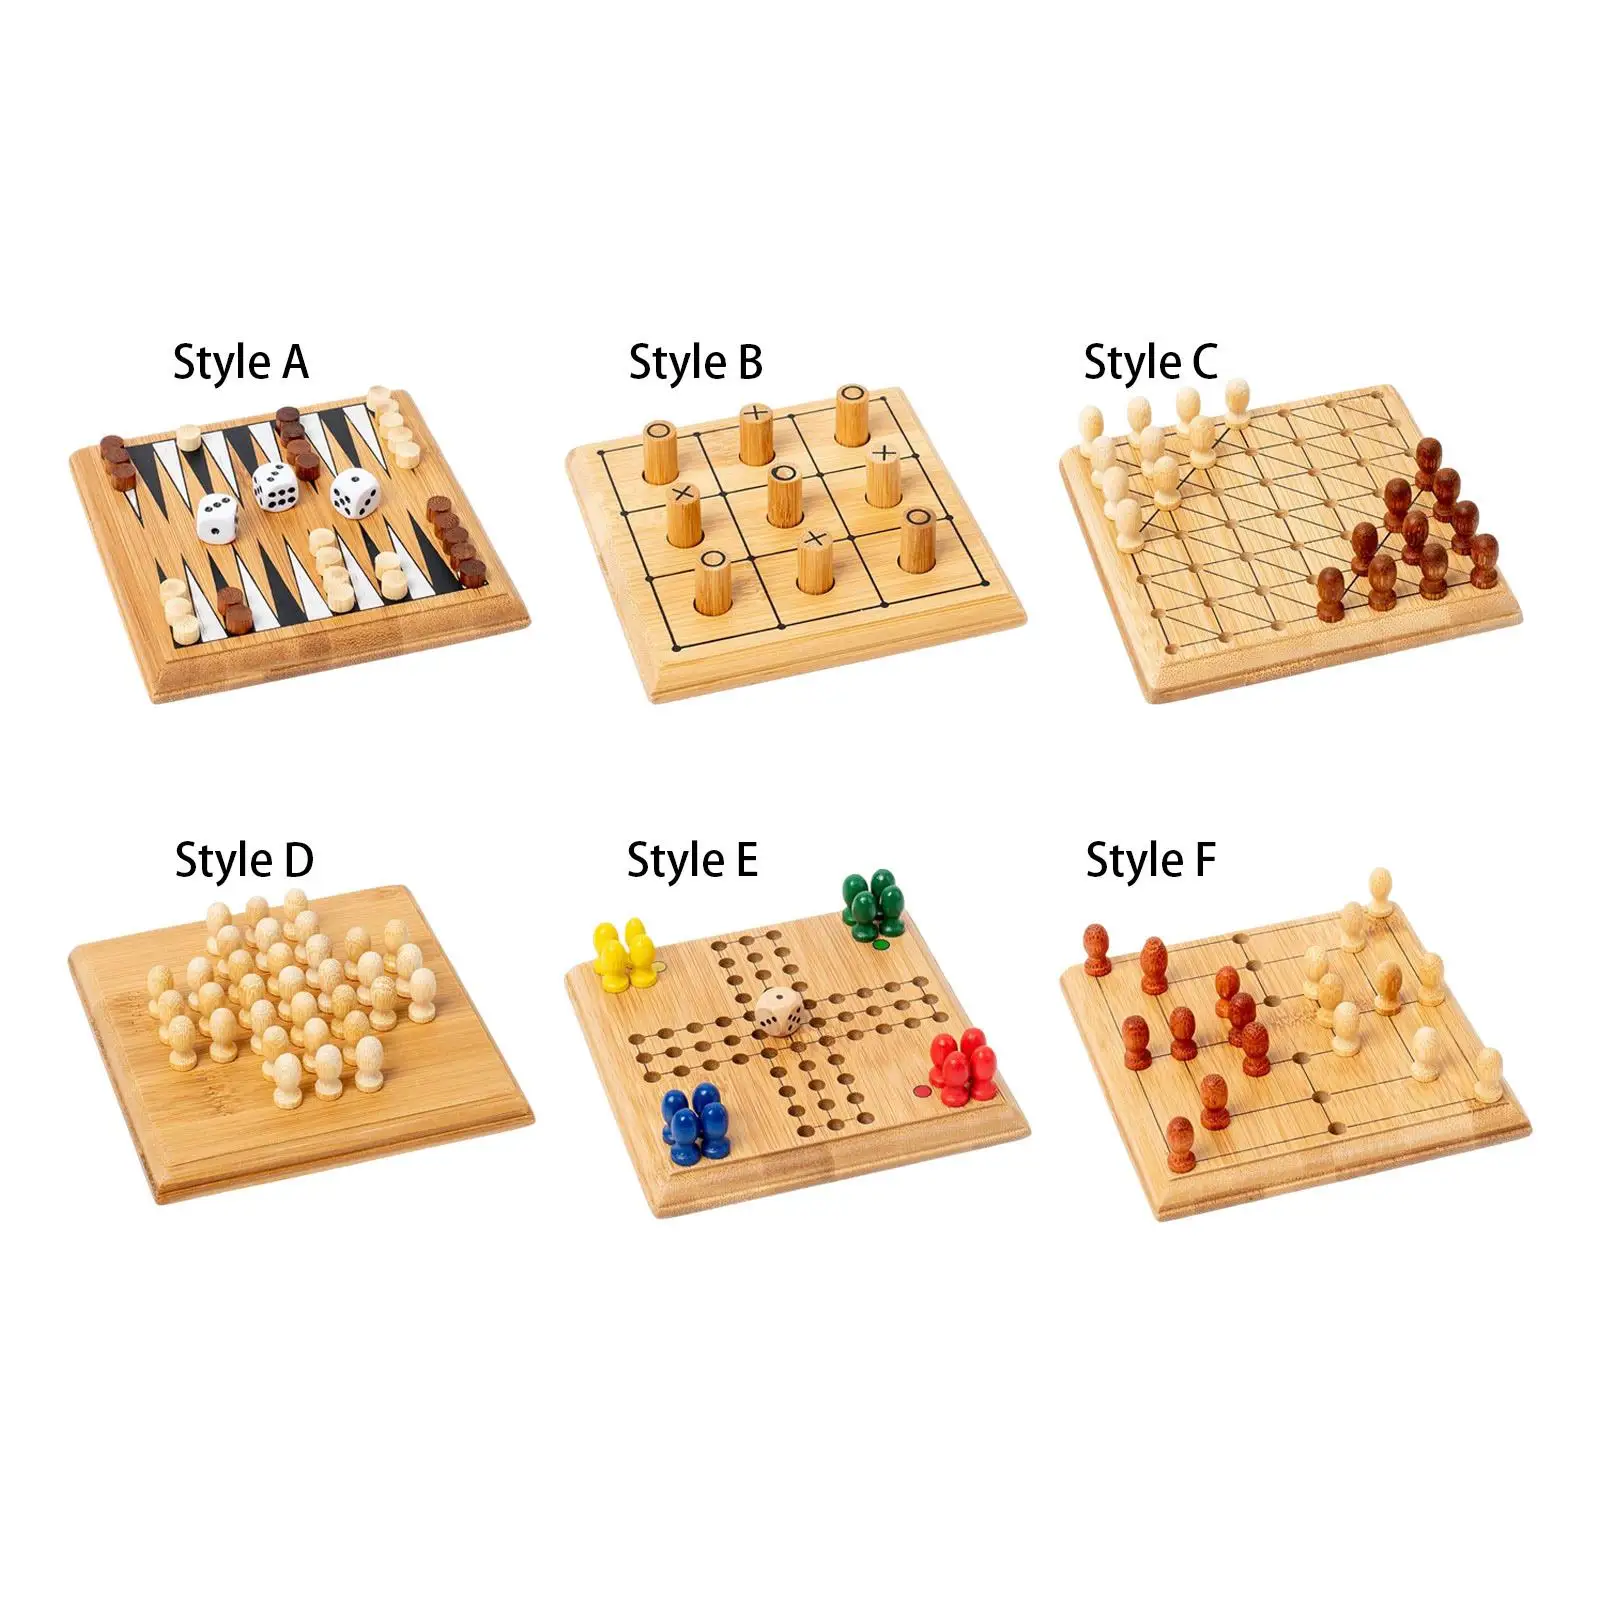 Portable Wooden Board Game with Game Pieces Brain Training Puzzle Strategy Game Educational Toys for Kids Adults Travel Party